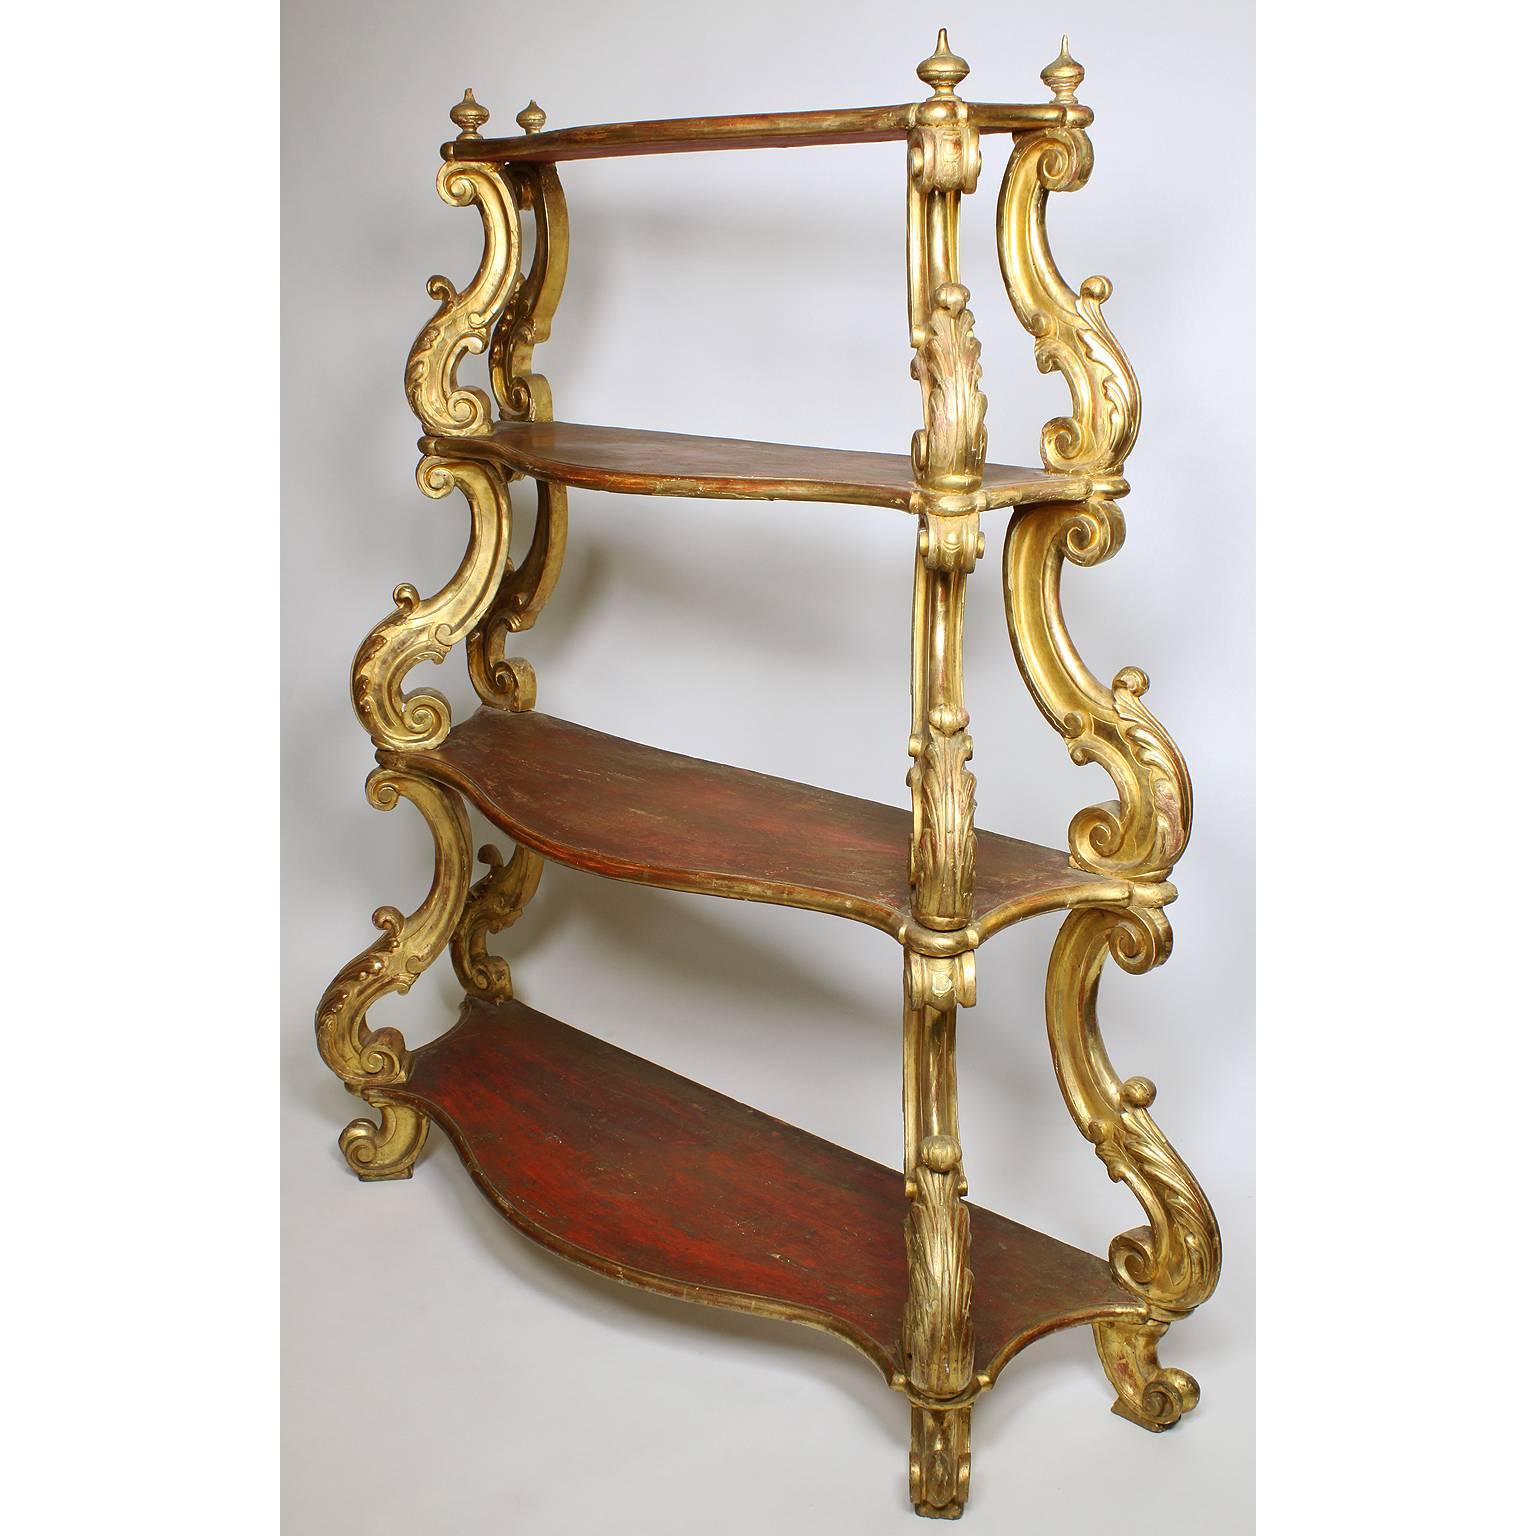 A rare Italian Venetian 18th century, Renaissance style four-shelved gilt-wood carved étagère book or display stand. The bowed front shelves, each surmounted with 